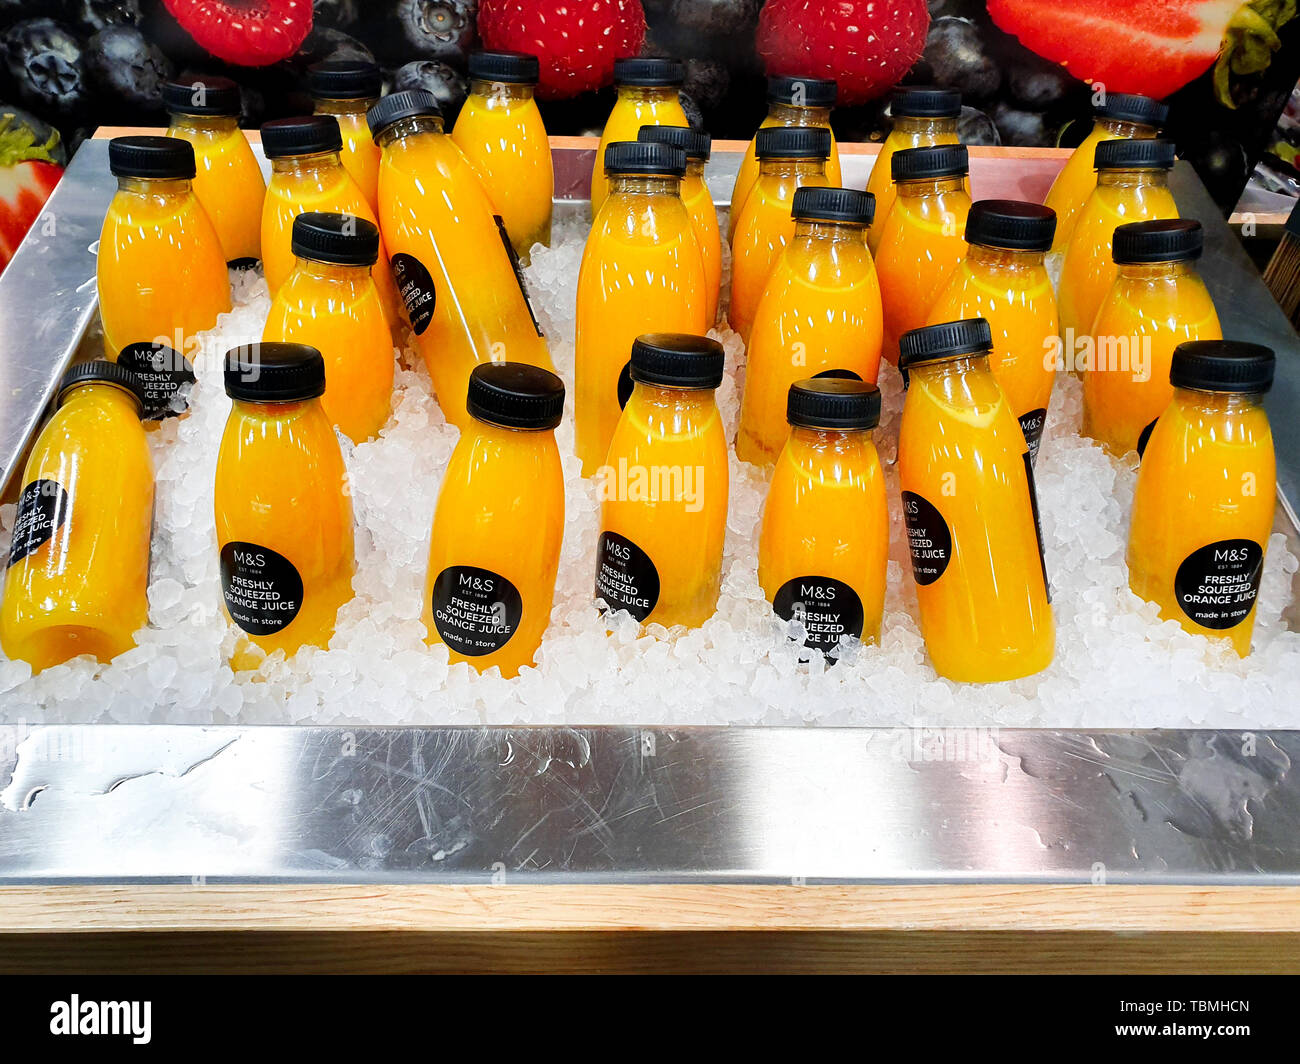 https://c8.alamy.com/comp/TBMHCN/sheffield-uk-31st-may-2019-bottles-of-fresh-orange-juice-on-sale-from-marks-and-spencers-on-sale-in-meadowhall-TBMHCN.jpg